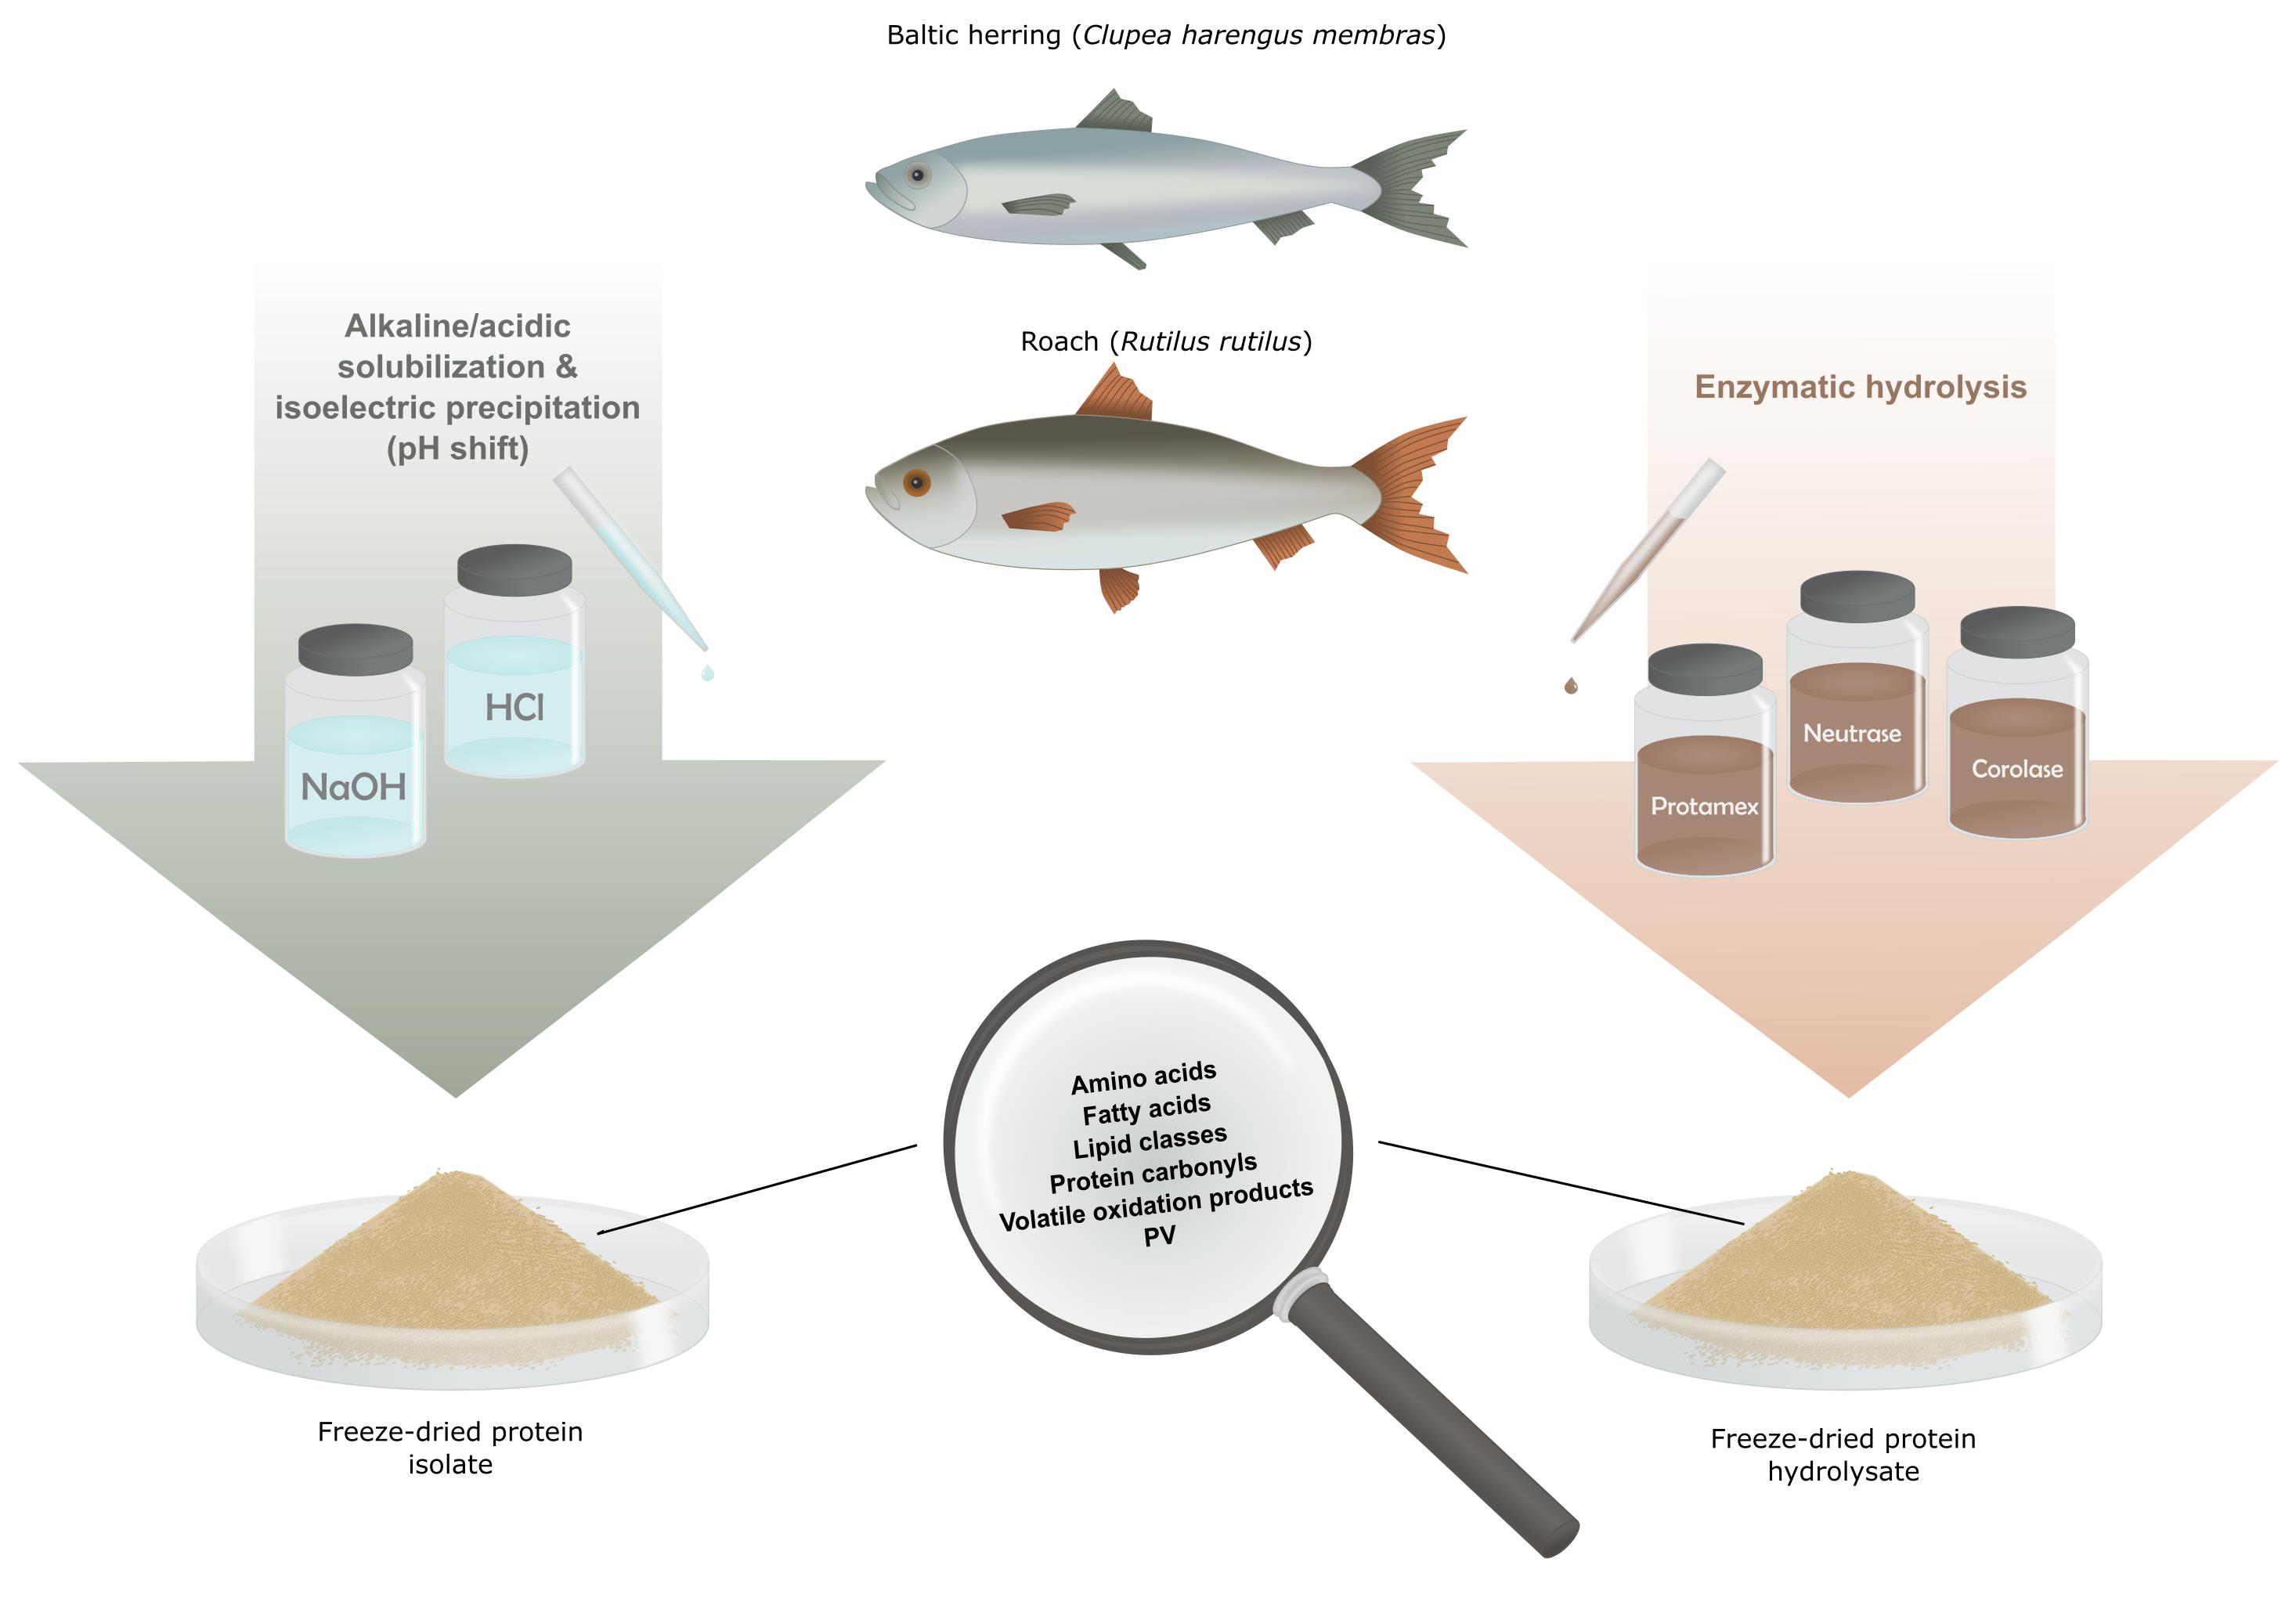 Foods | Free Full-Text | Quality of Protein Isolates and Hydrolysates from  Baltic Herring (Clupea harengus membras) and Roach (Rutilus rutilus)  Produced by pH-Shift Processes and Enzymatic Hydrolysis